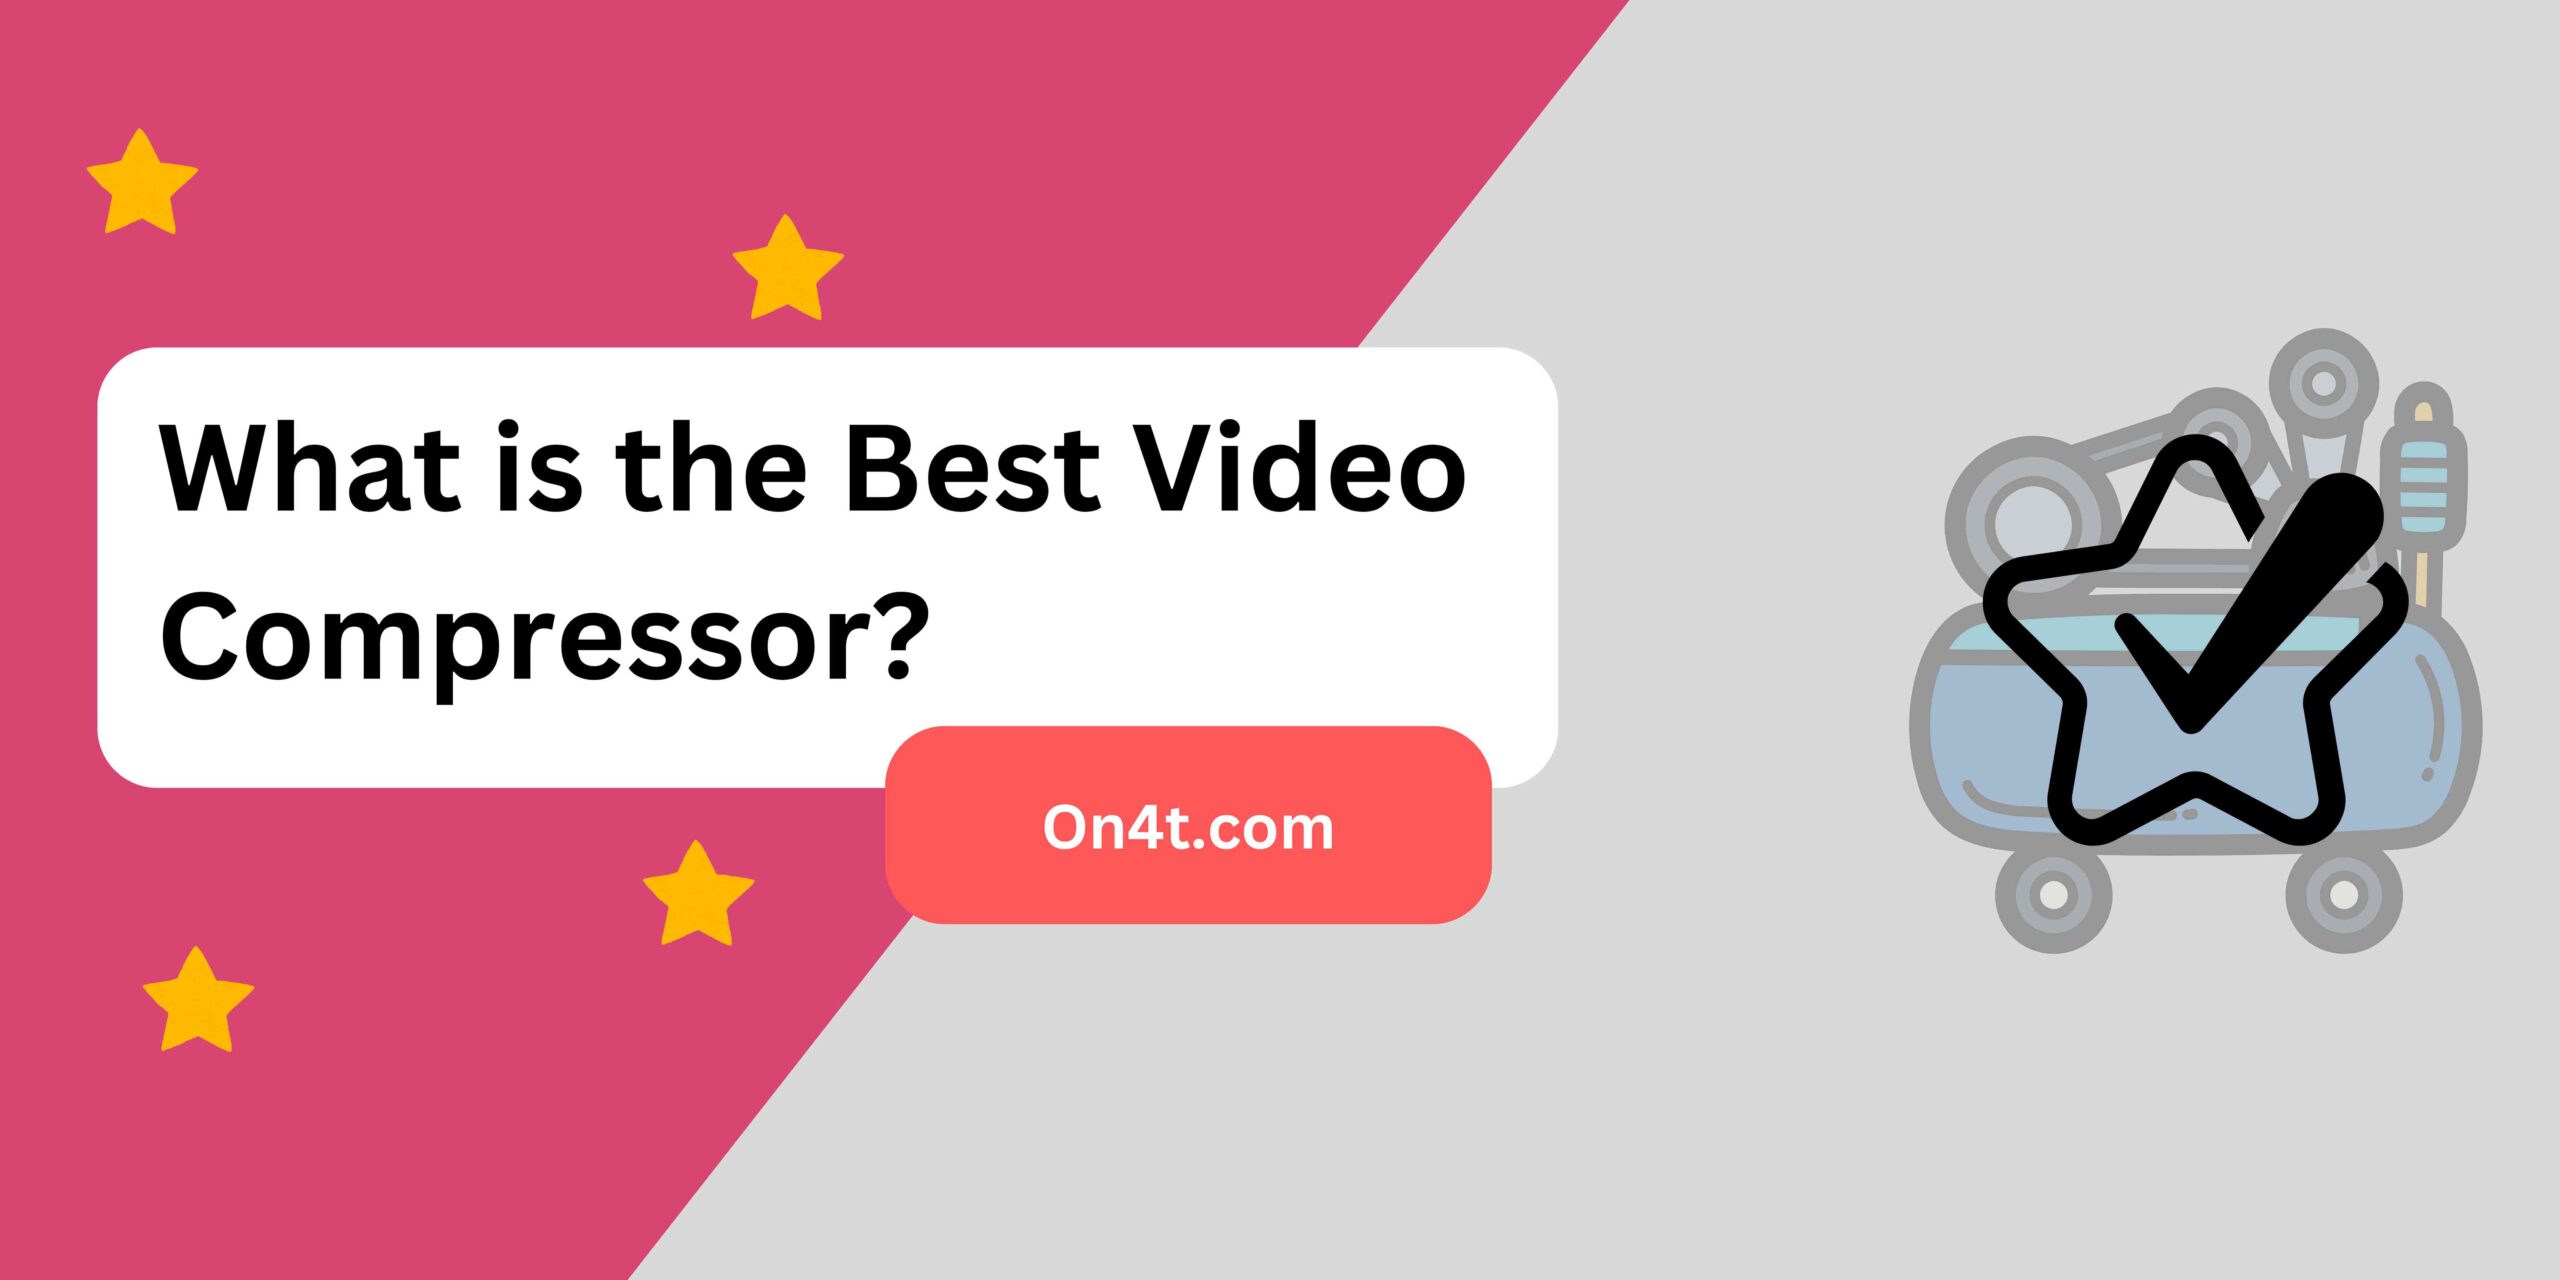 What is the Best Video Compressor